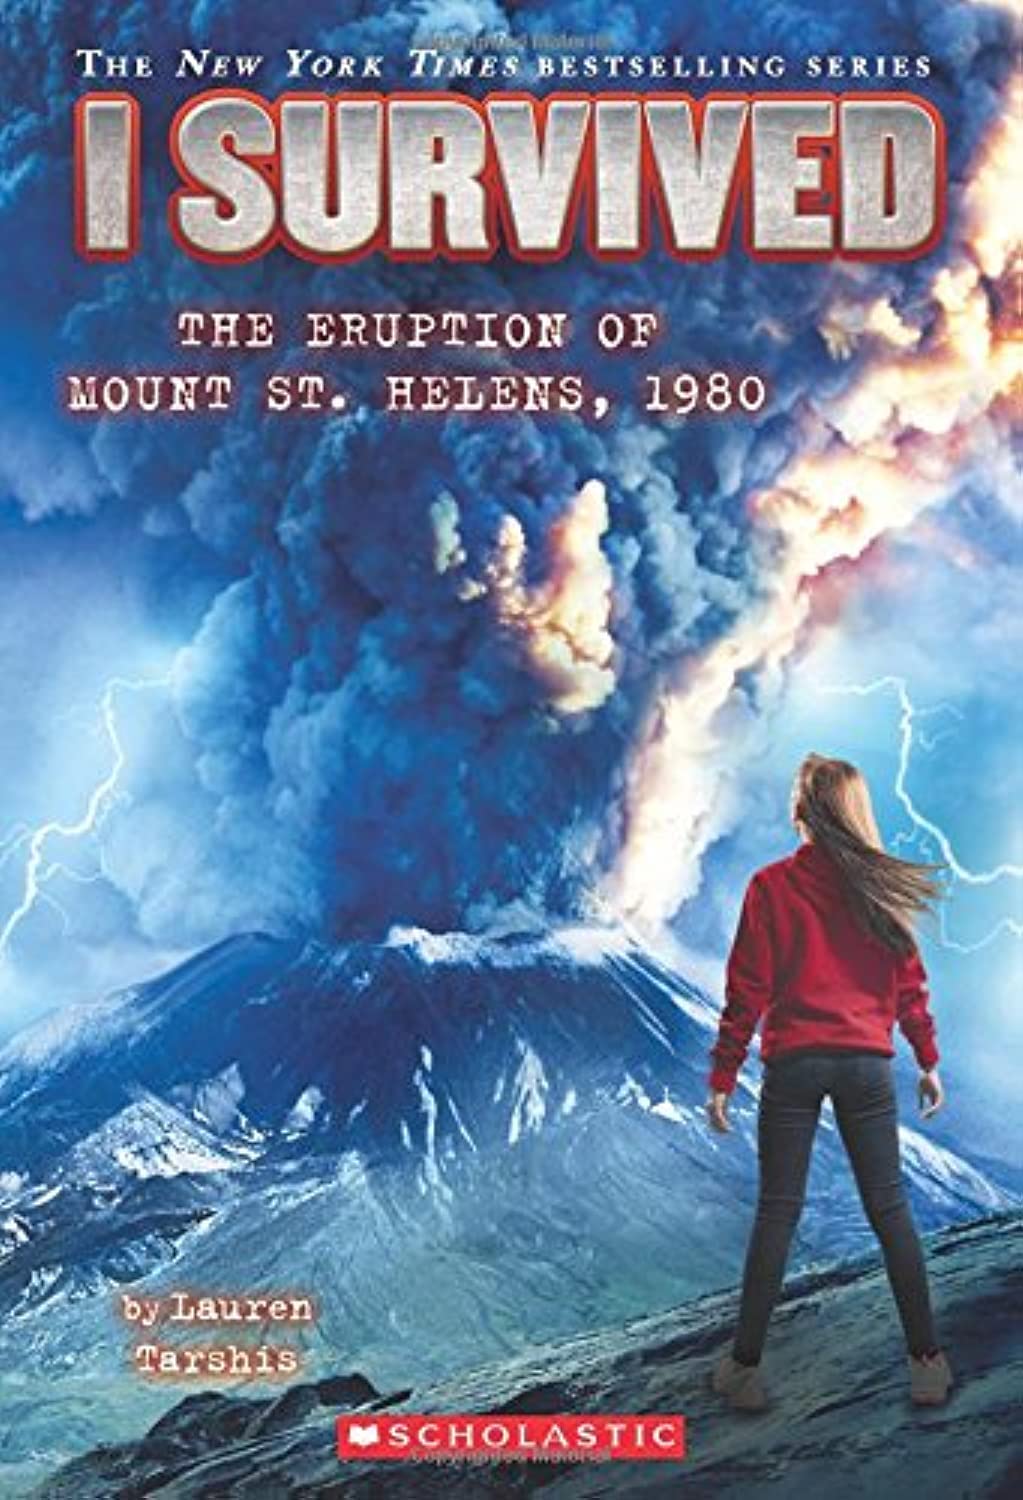 I Survived Book Covers The Eruption of Mount St. Helens, 1980